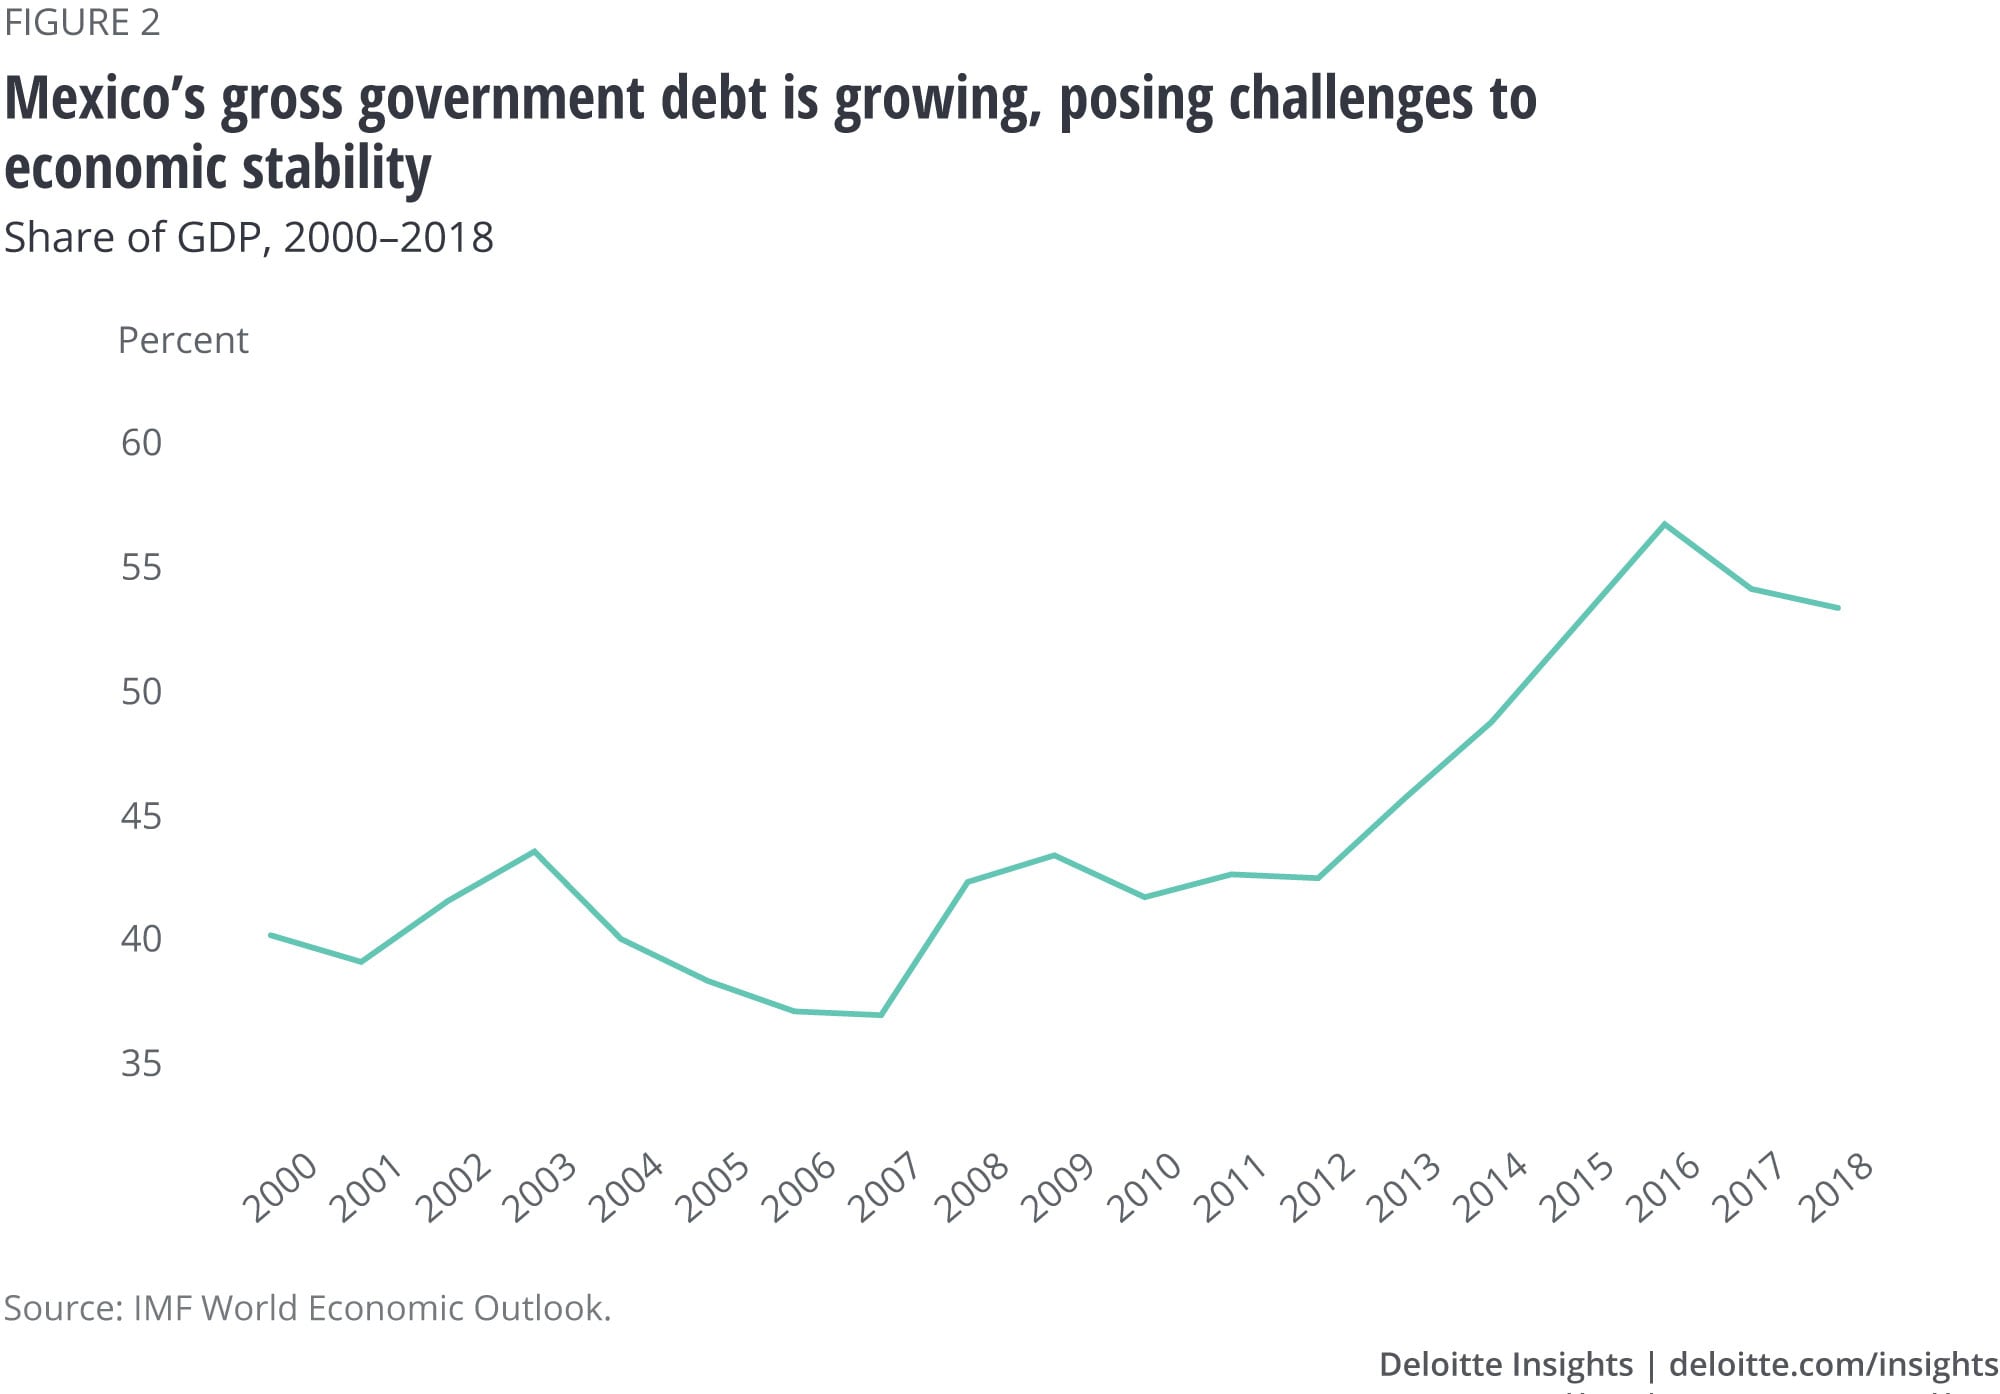 Mexico’s gross government debt is growing, posing challenges to economic stability